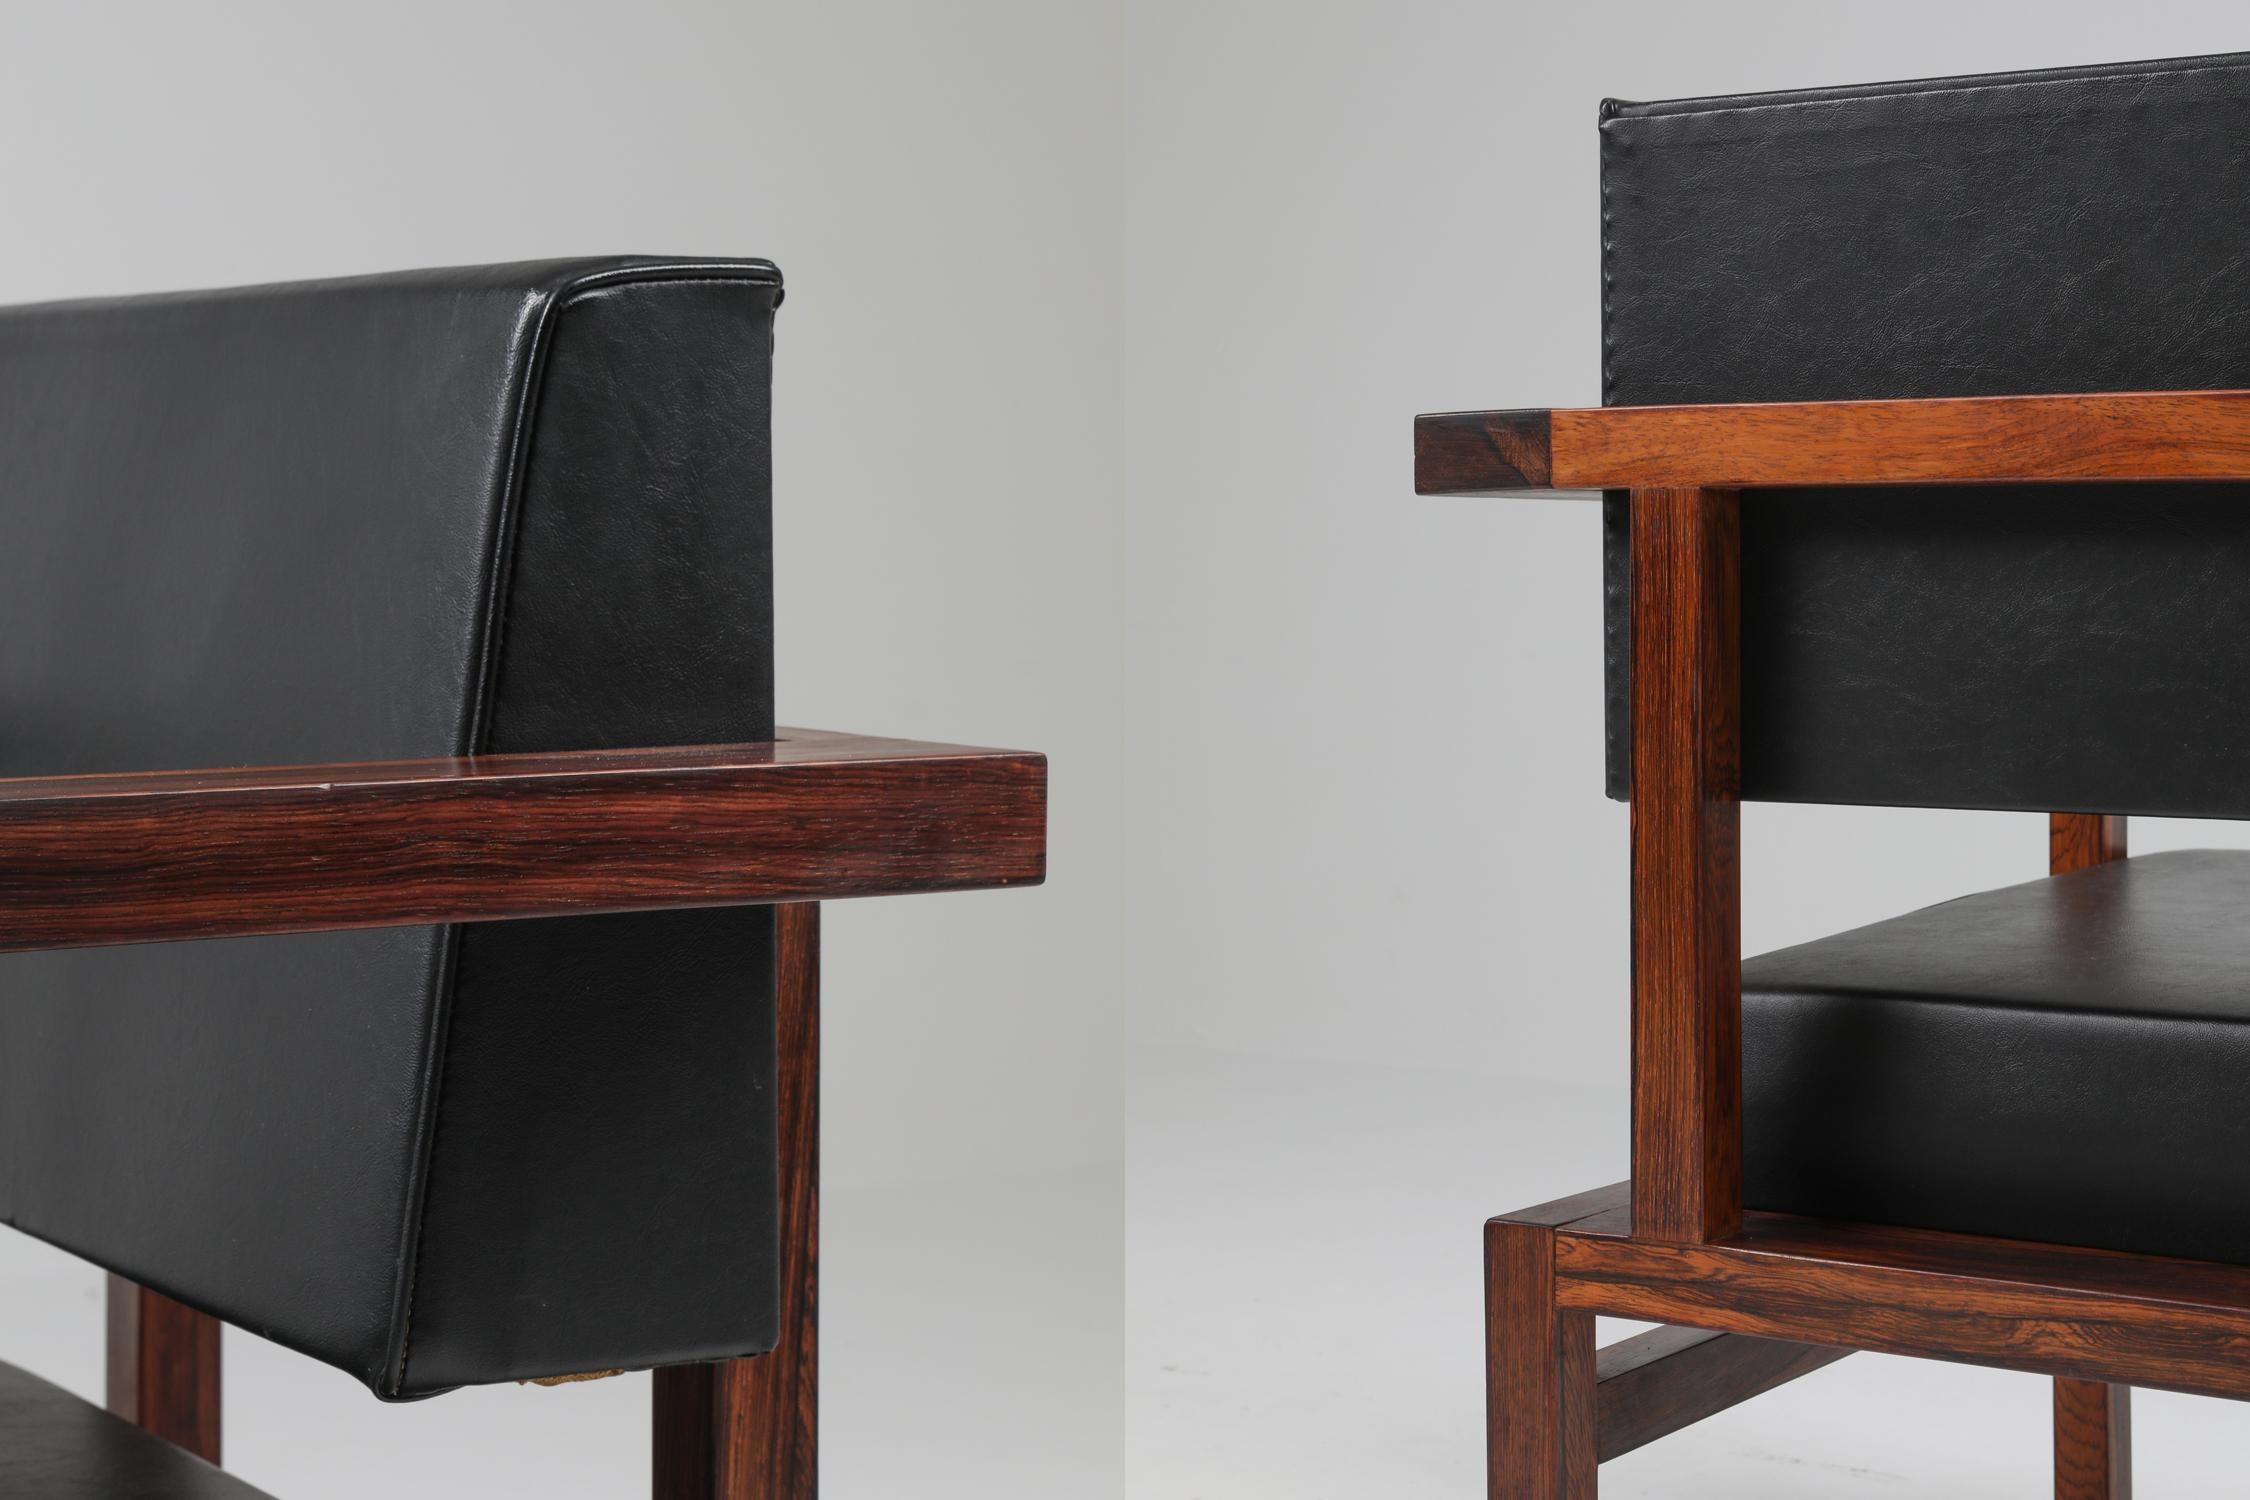 Wim Den Boon Executive Chairs in Black Leather, 1950s For Sale 3